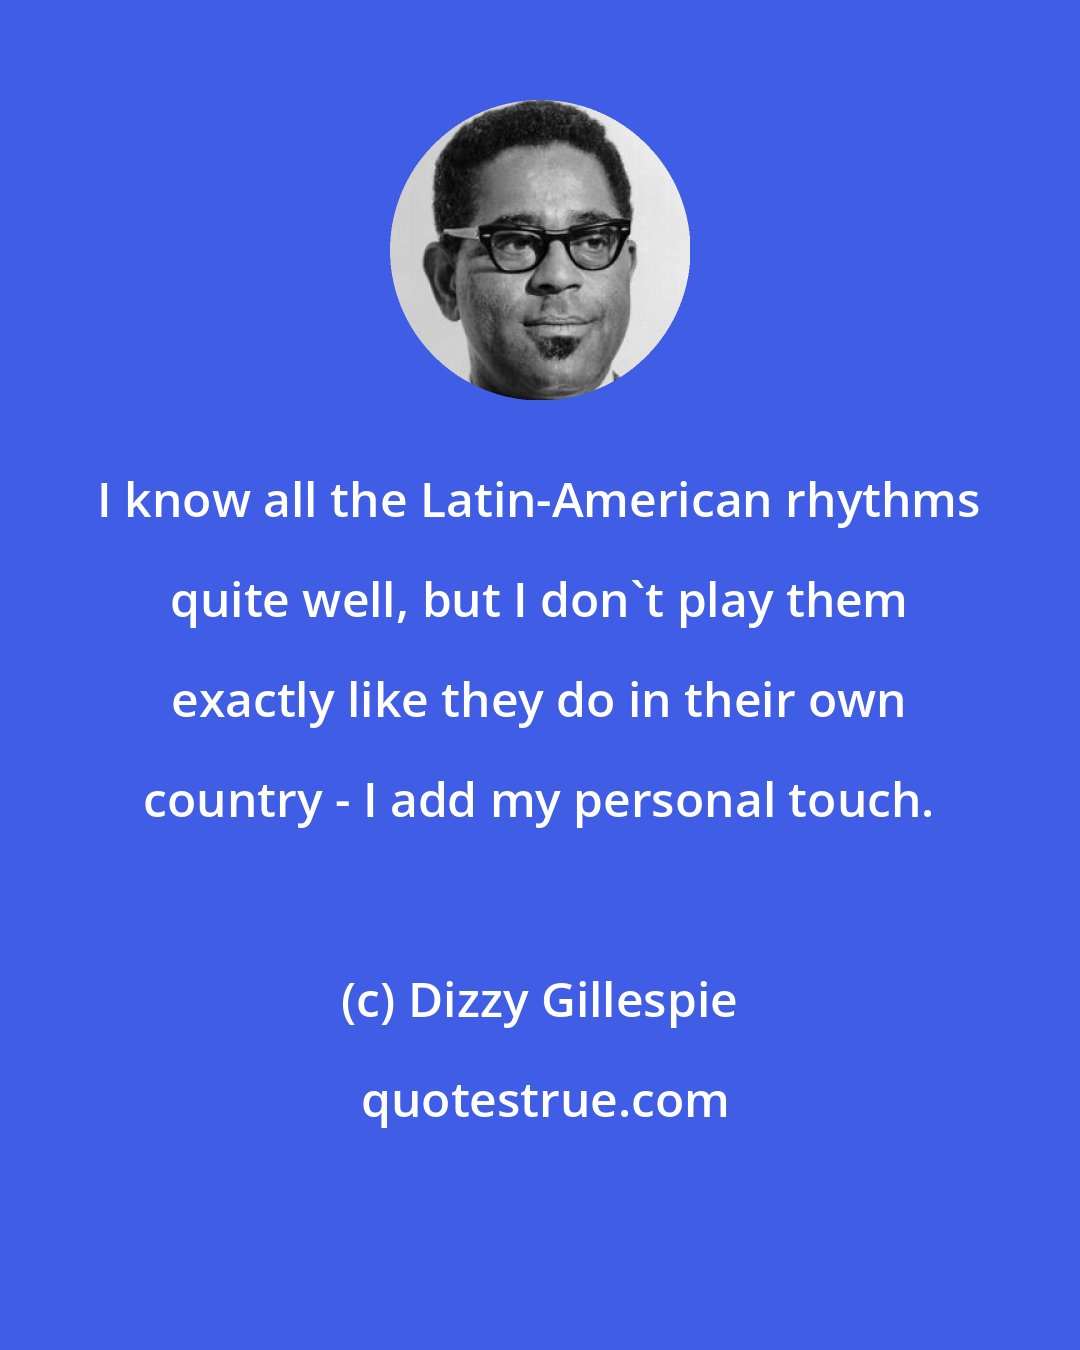 Dizzy Gillespie: I know all the Latin-American rhythms quite well, but I don't play them exactly like they do in their own country - I add my personal touch.